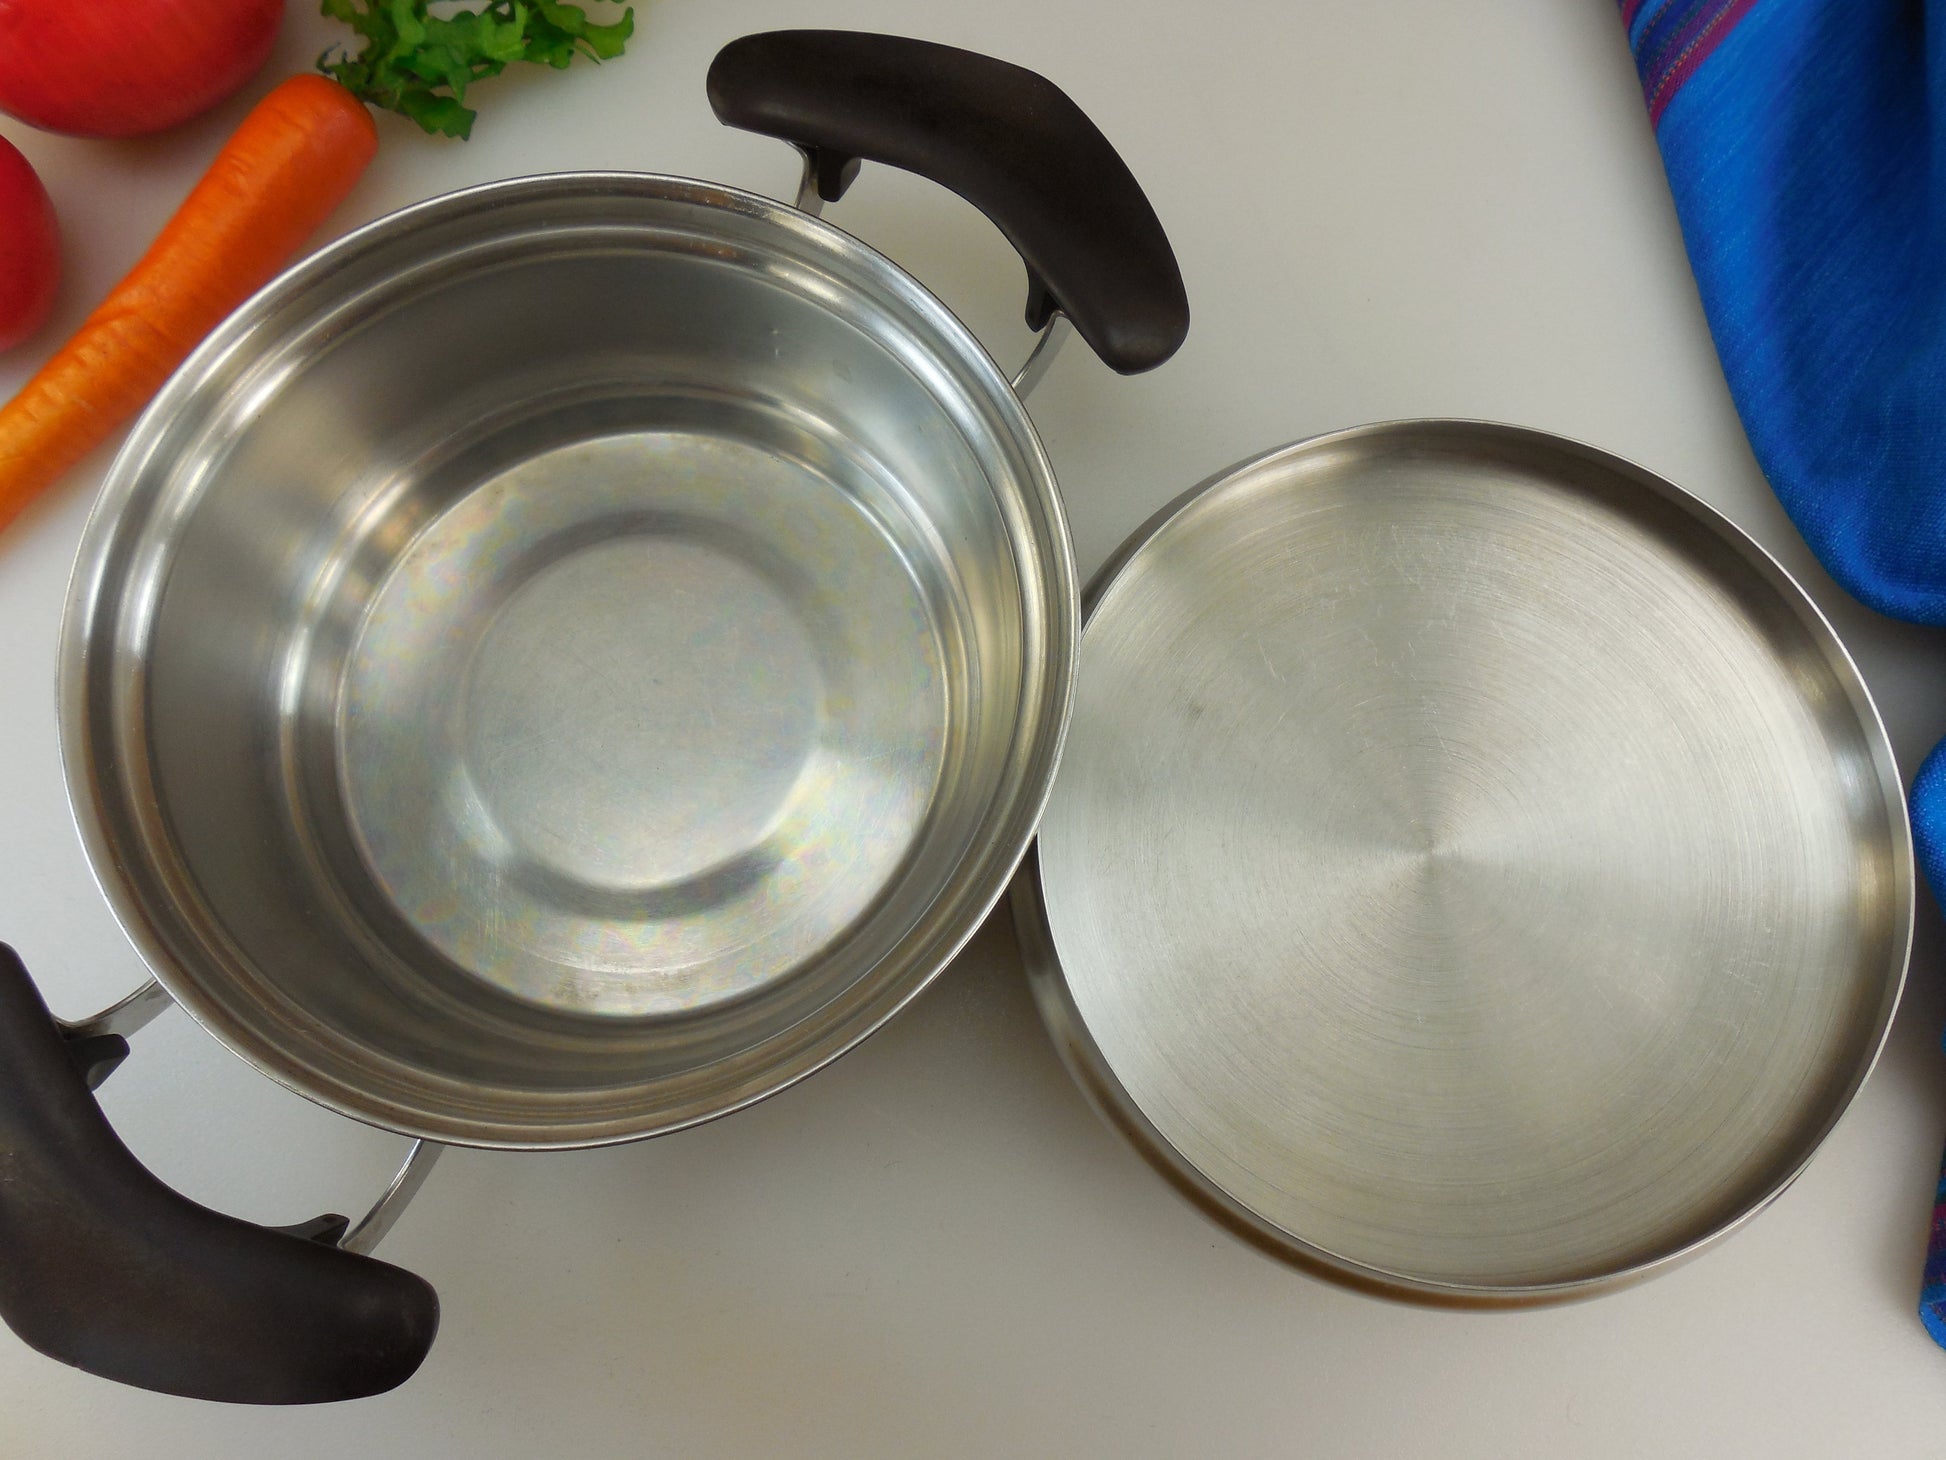 Elegance USA - Thermium Multi-Plex Stainless Steel Double Handle Saucepan... cleaned